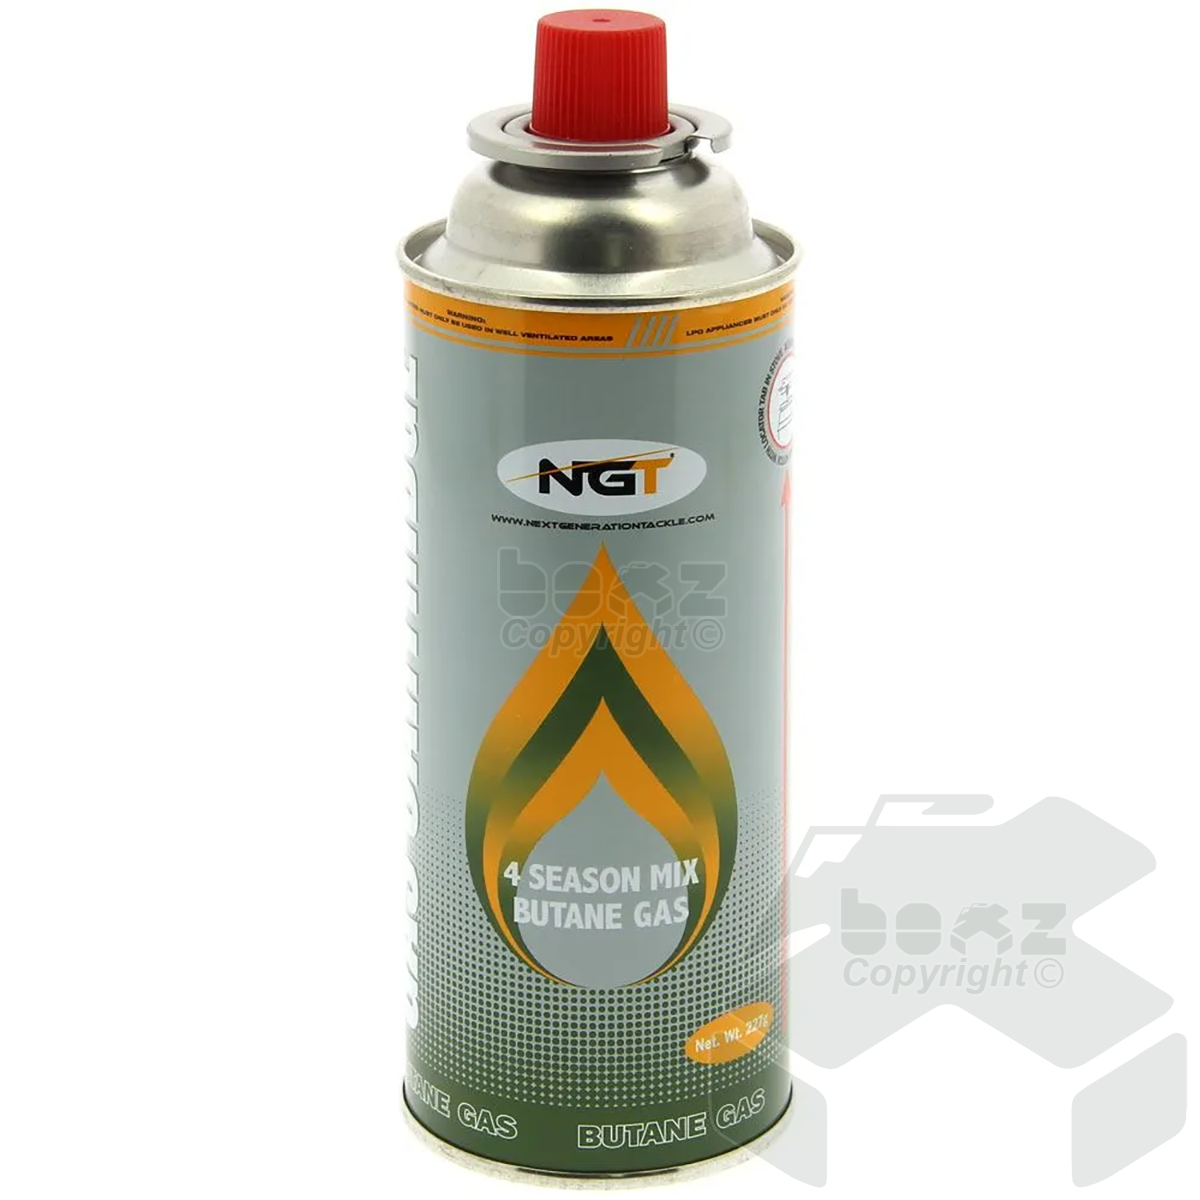 NGT 227g Butane Gas Canister Camping Gas - 4 Season Mix